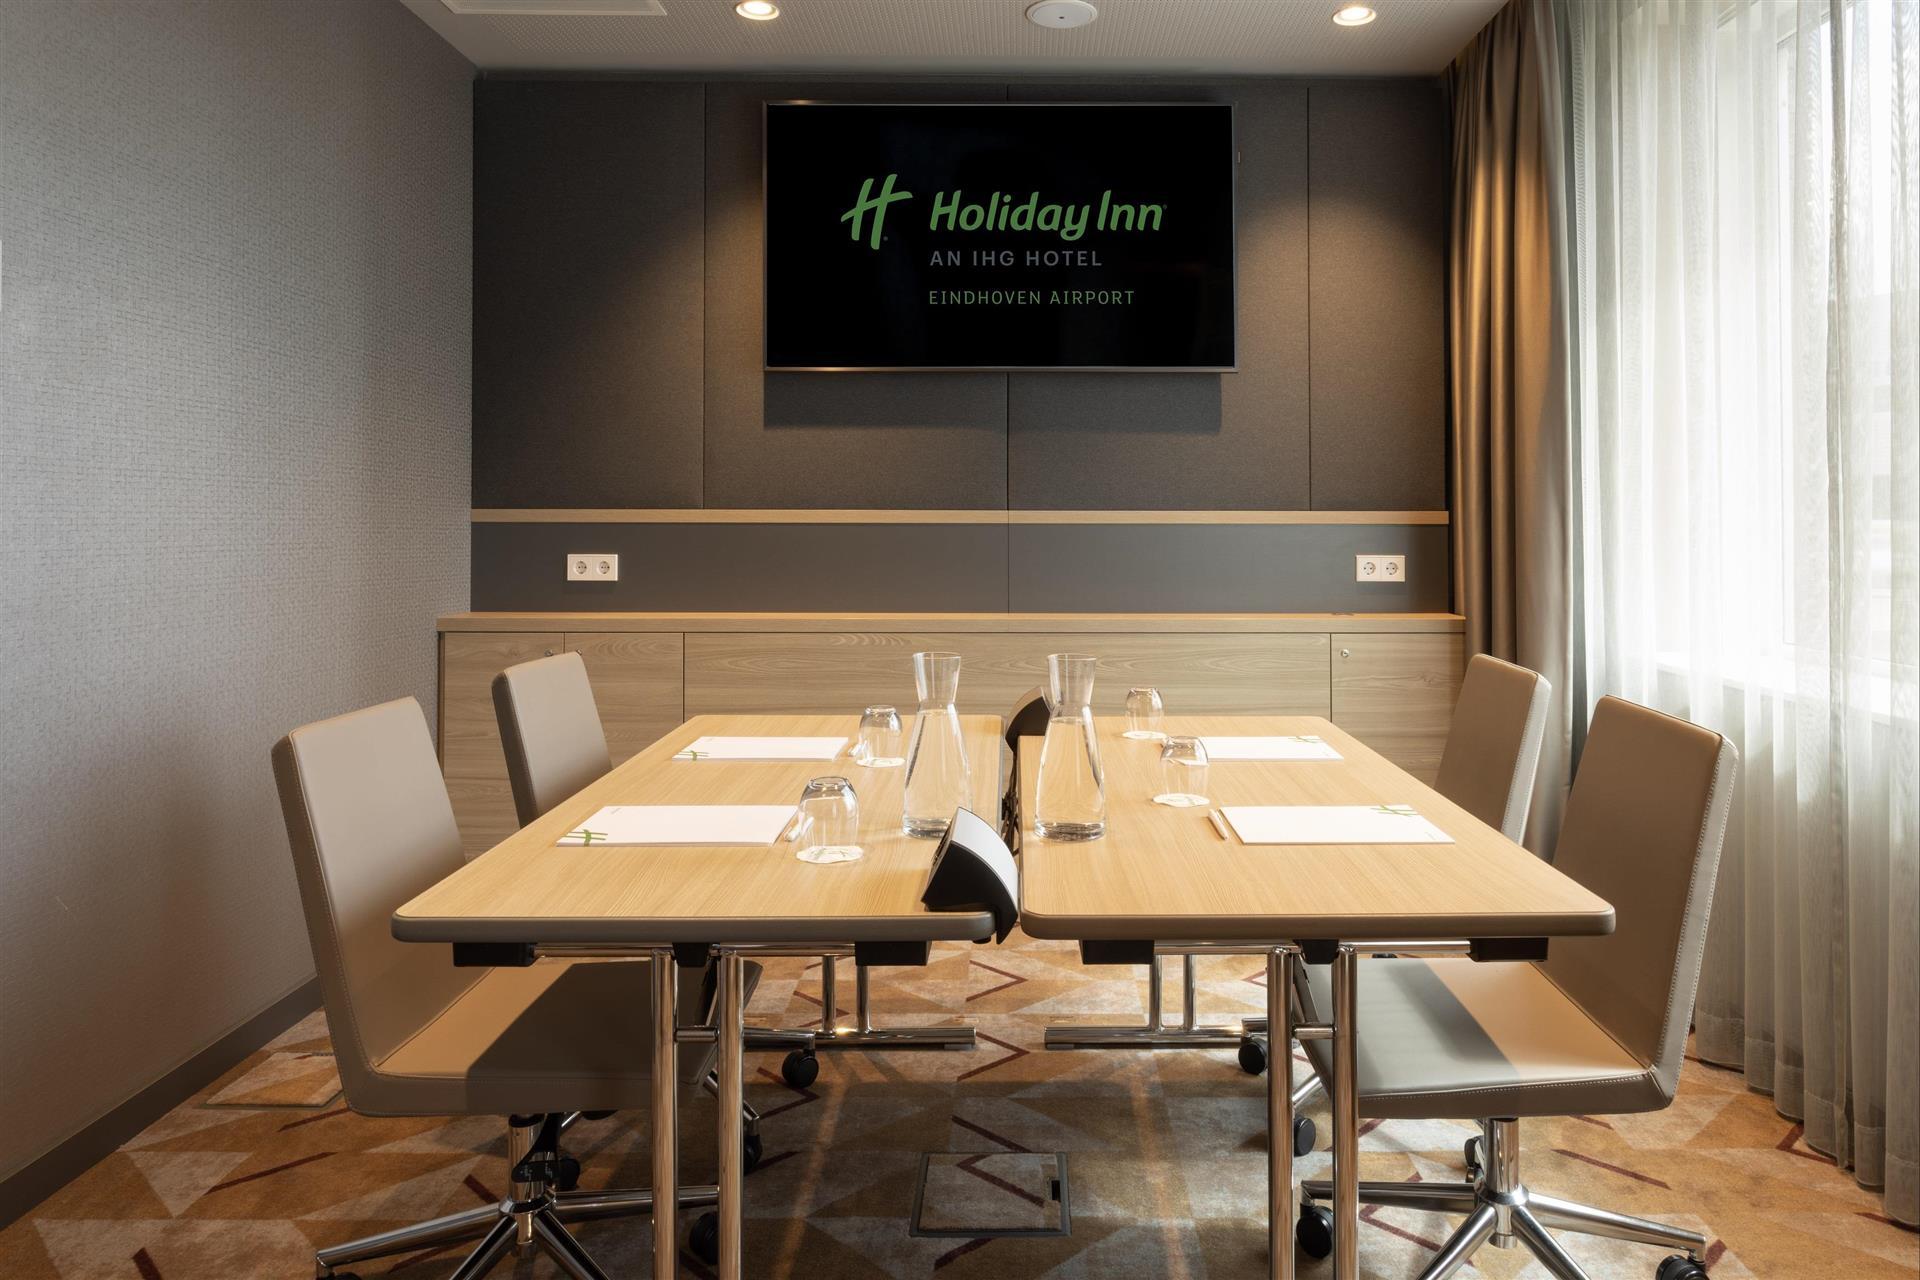 Holiday Inn Eindhoven Airport in Eindhoven, NL